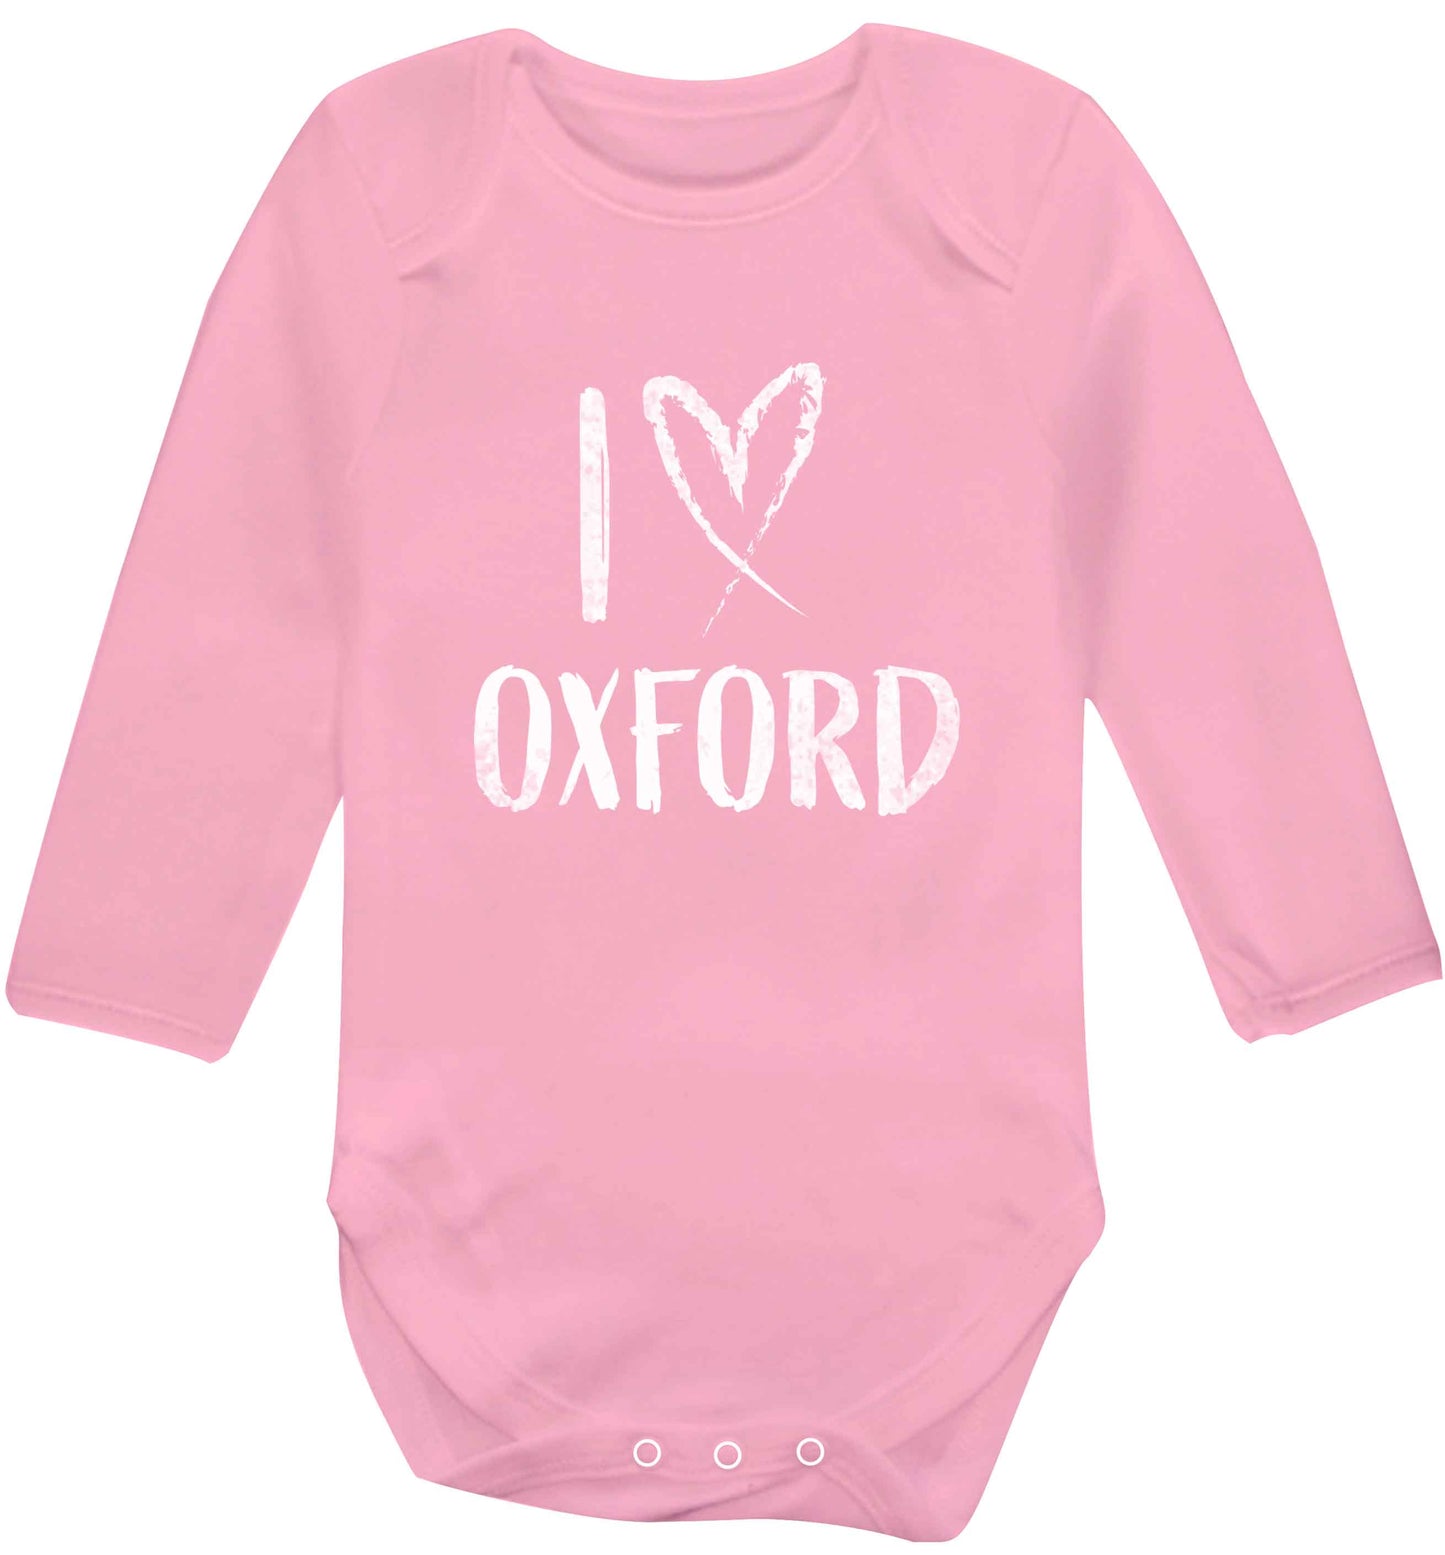 I love Oxford baby vest long sleeved pale pink 6-12 months